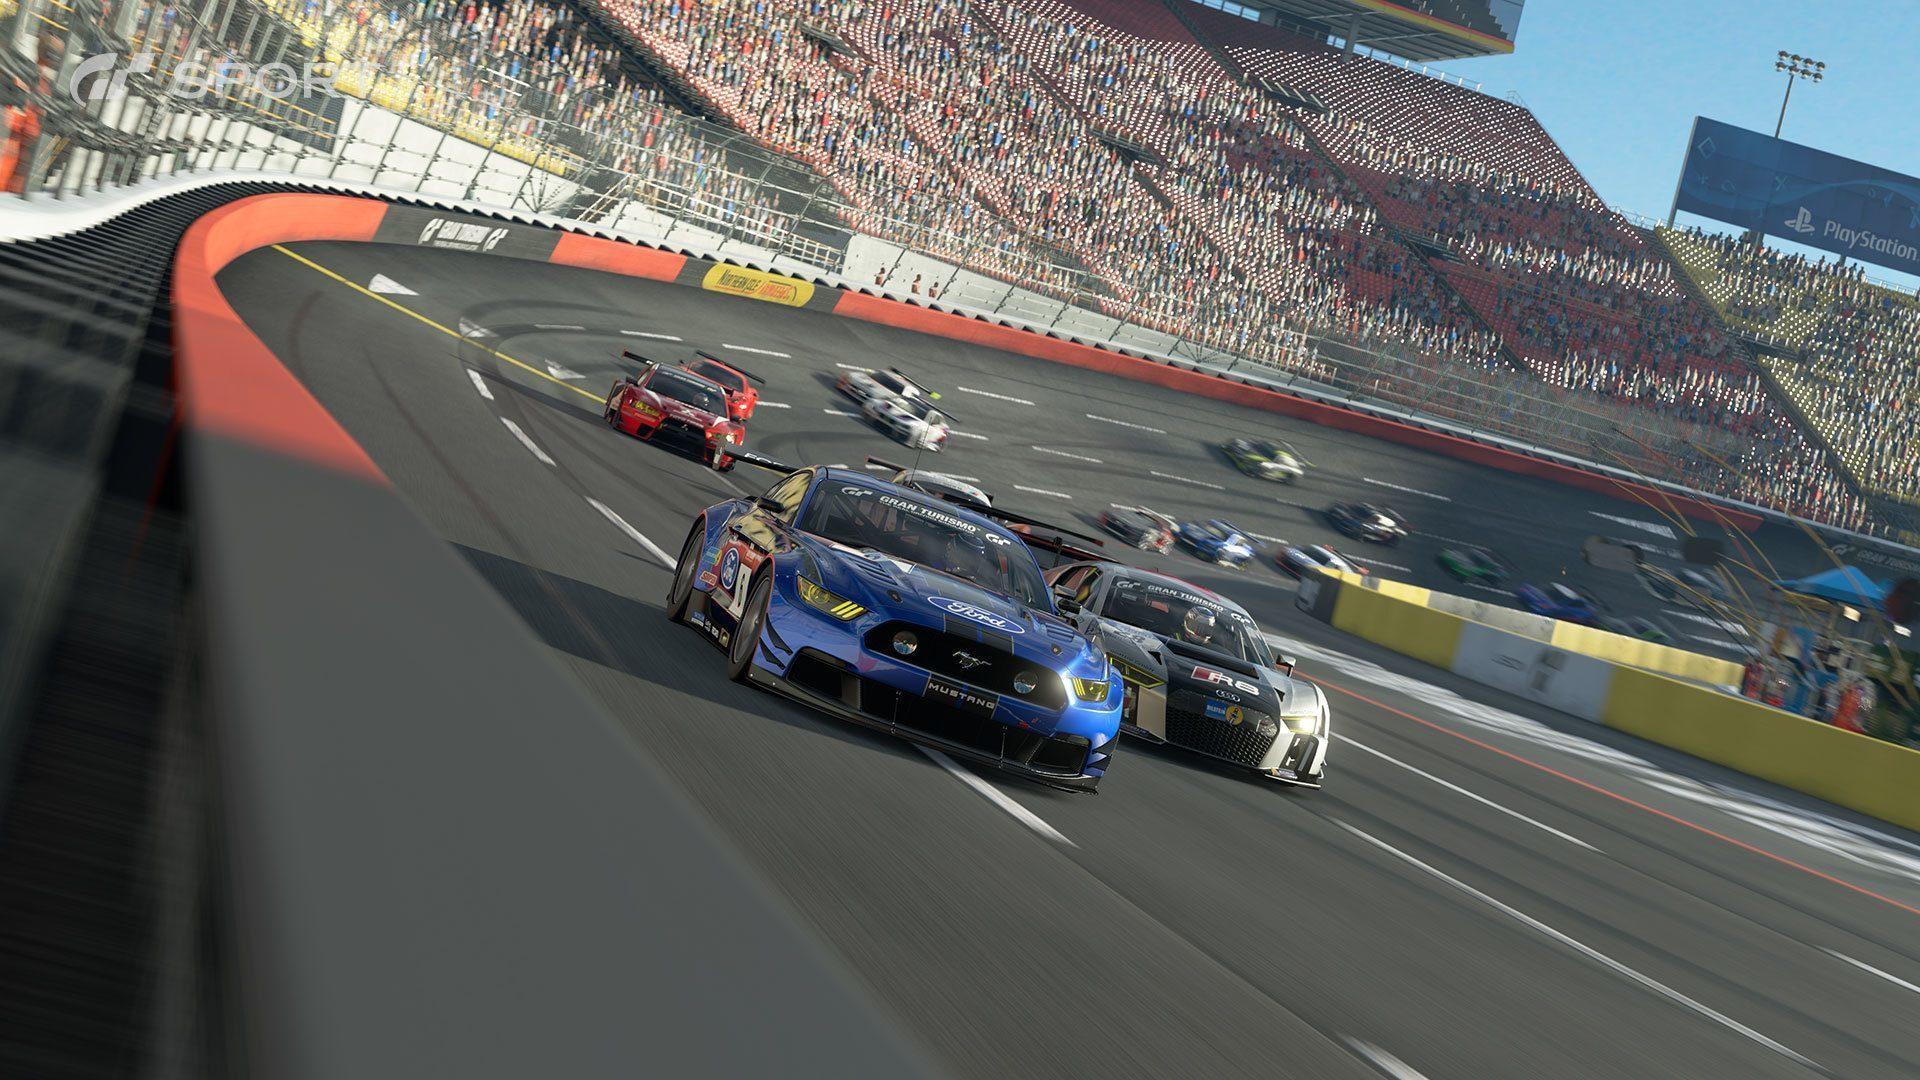 GT Sport's Online Experience is Only Around 15% of Total Game